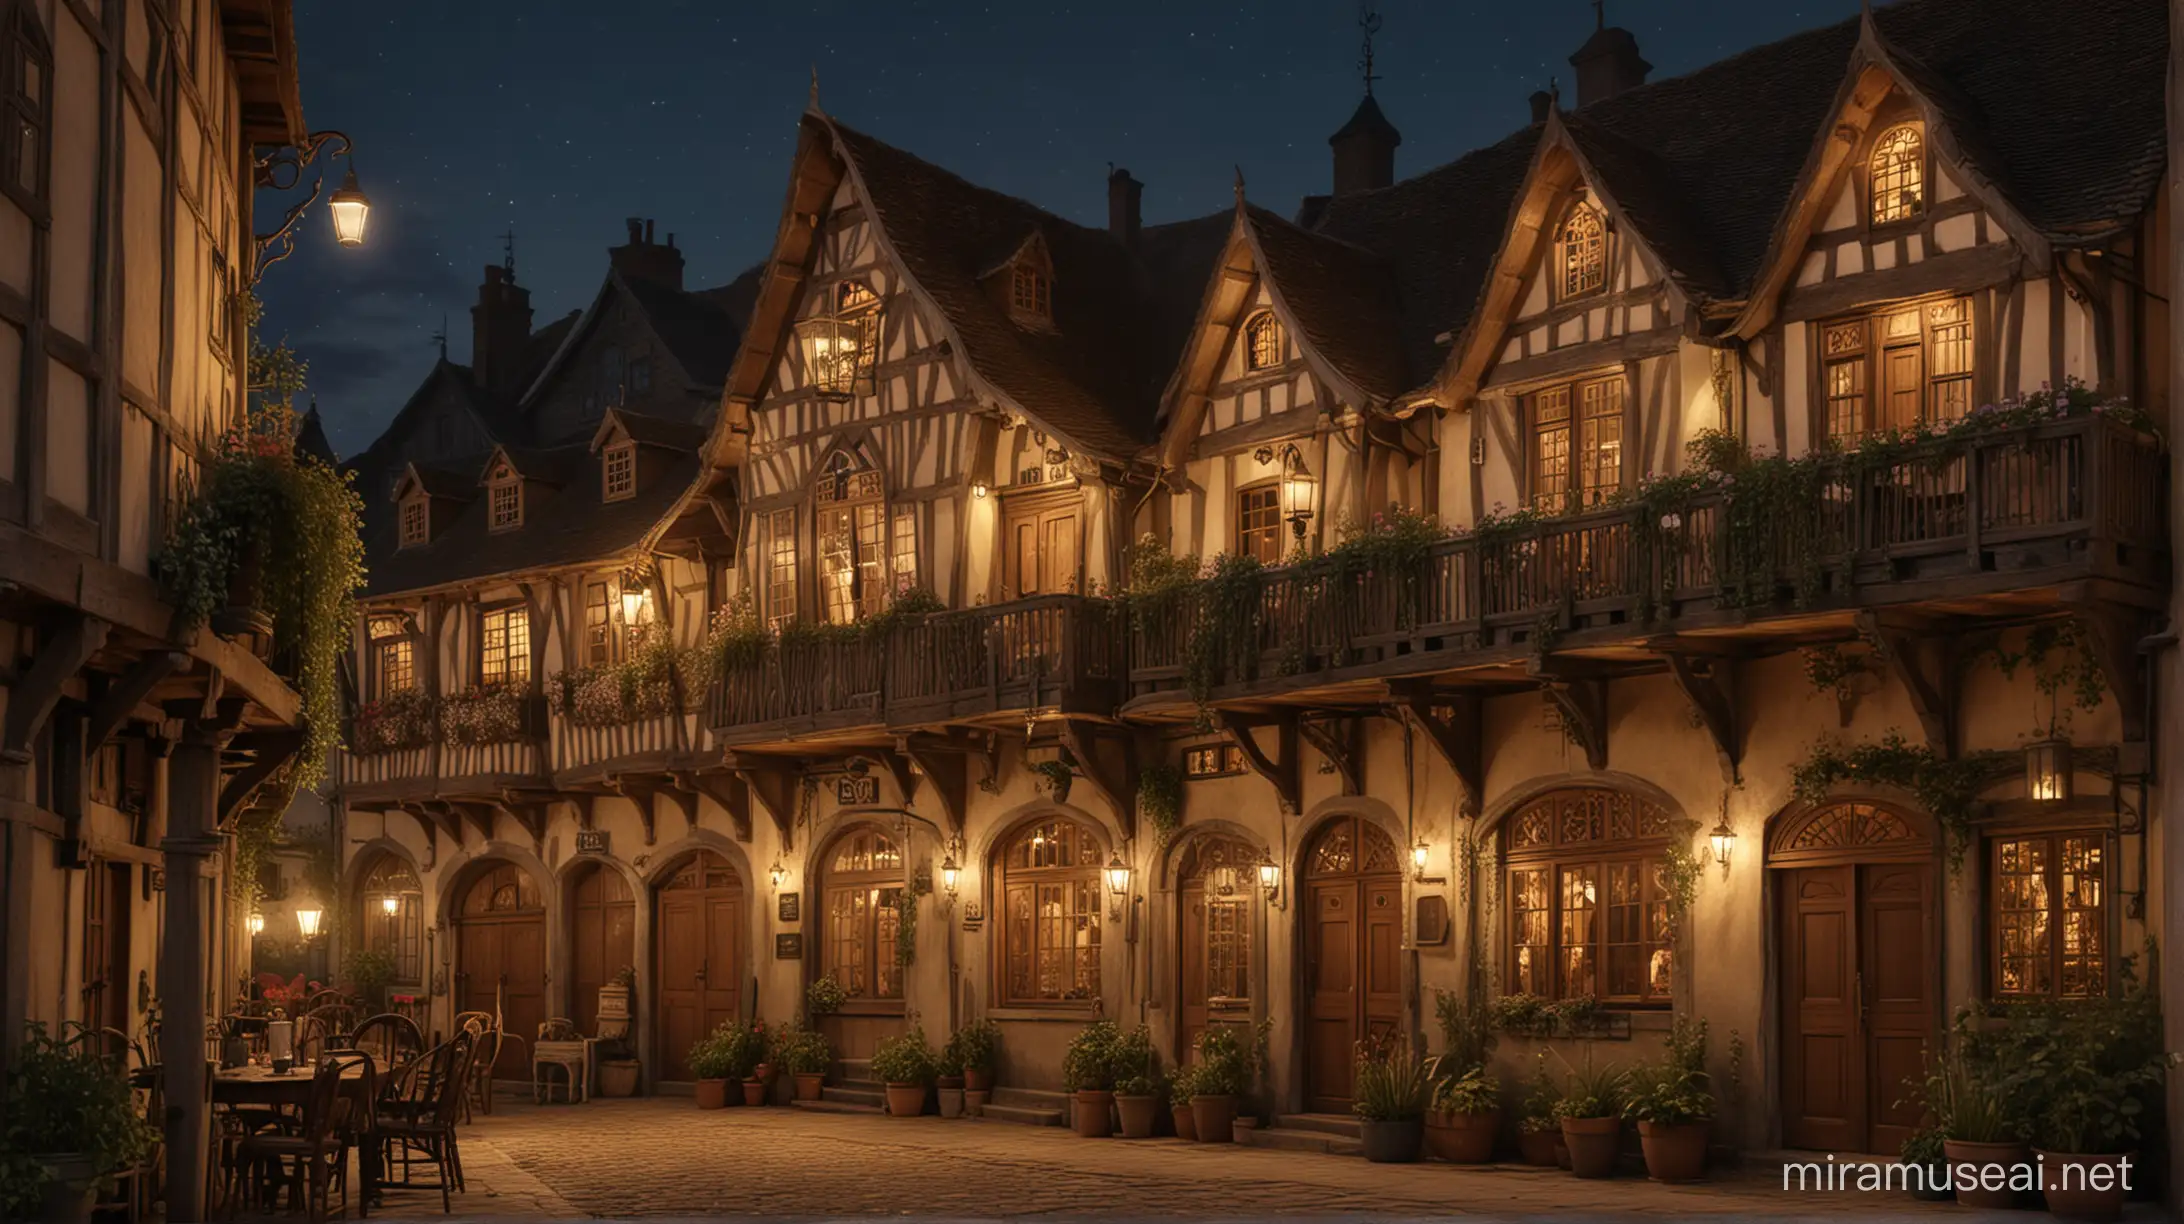 Large 17th century style fantasy brothel seen from the street. The building stands apart from other buildings by a small garden. 6 elven prostitutes are standing in a group on the street in front of the building and on the balcony. it is evening and the lights are on